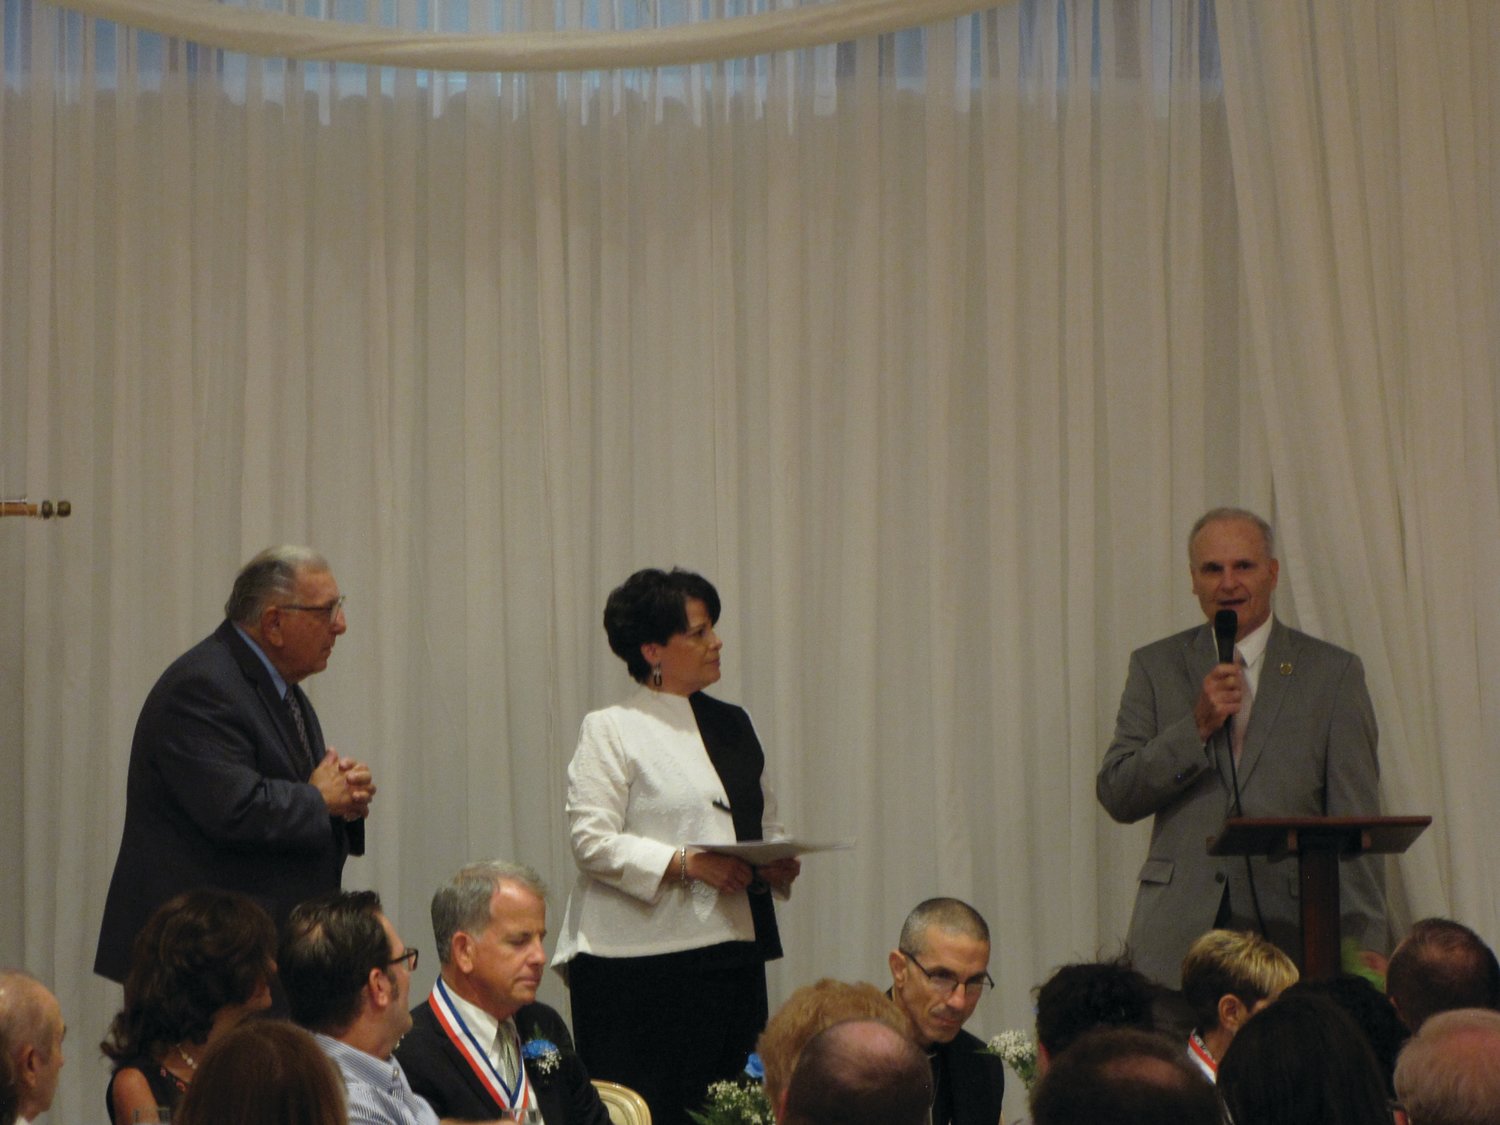 PAST PRESIDENT: Fred Vincent, right, who served as president of the Cranston Hall of Fame’s Board of Directors for a decade, was recognized for his service during last week’s installation dinner. He is joined on stage by board vice president Michael Traficante and Cindy Soccio, the board’s new president.